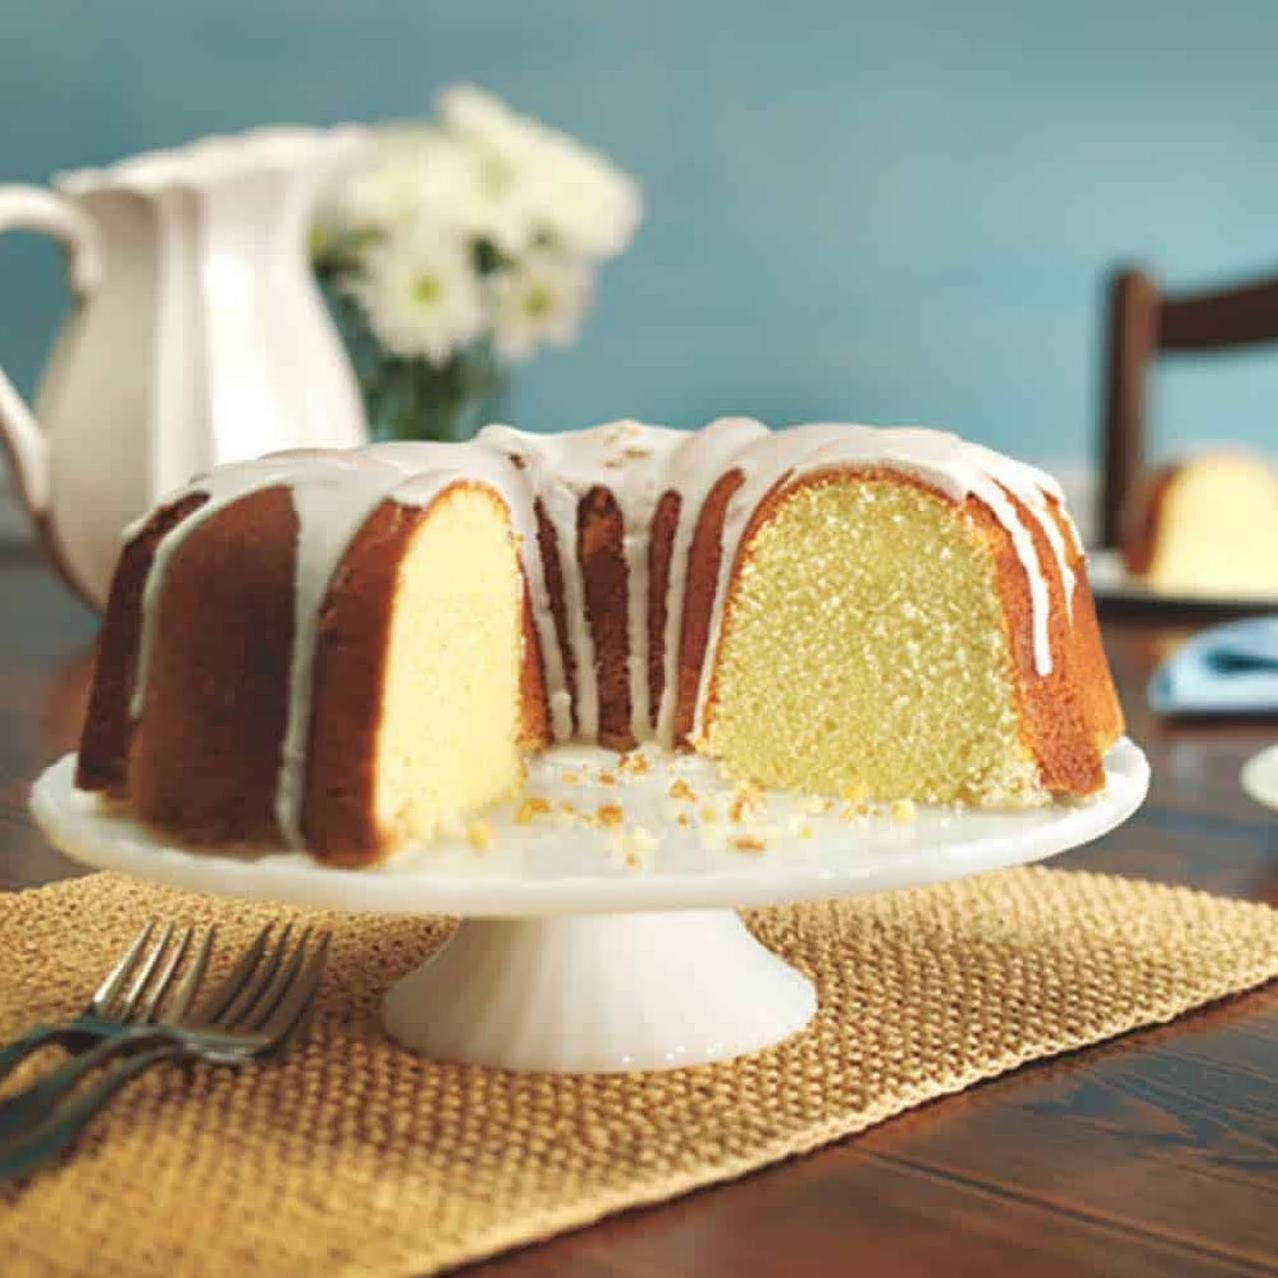  Don't let the simple appearance fool you - this cake is an absolute showstopper!